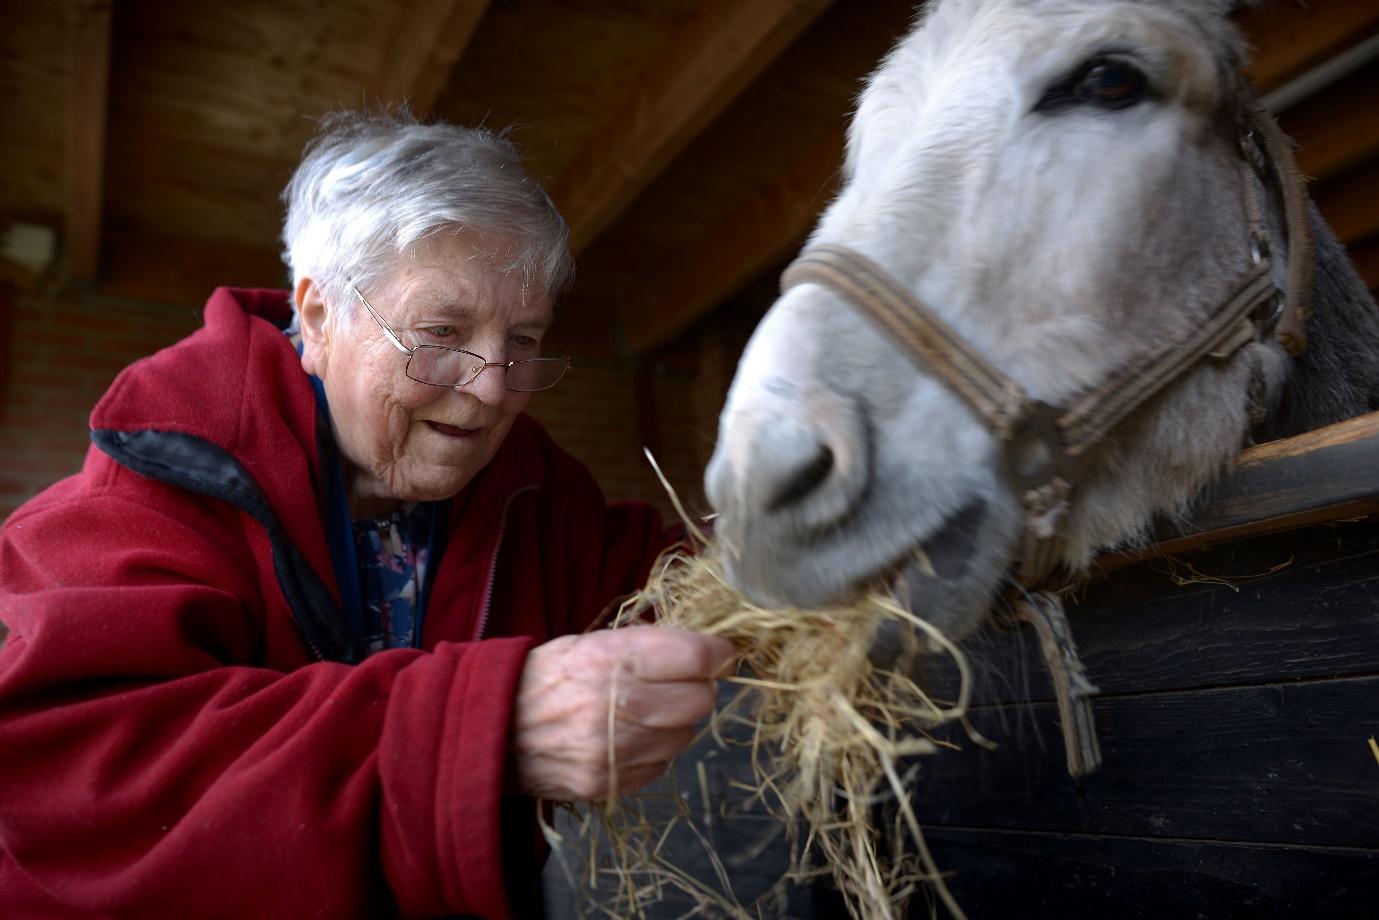 An old person feeding a horse

Description automatically generated